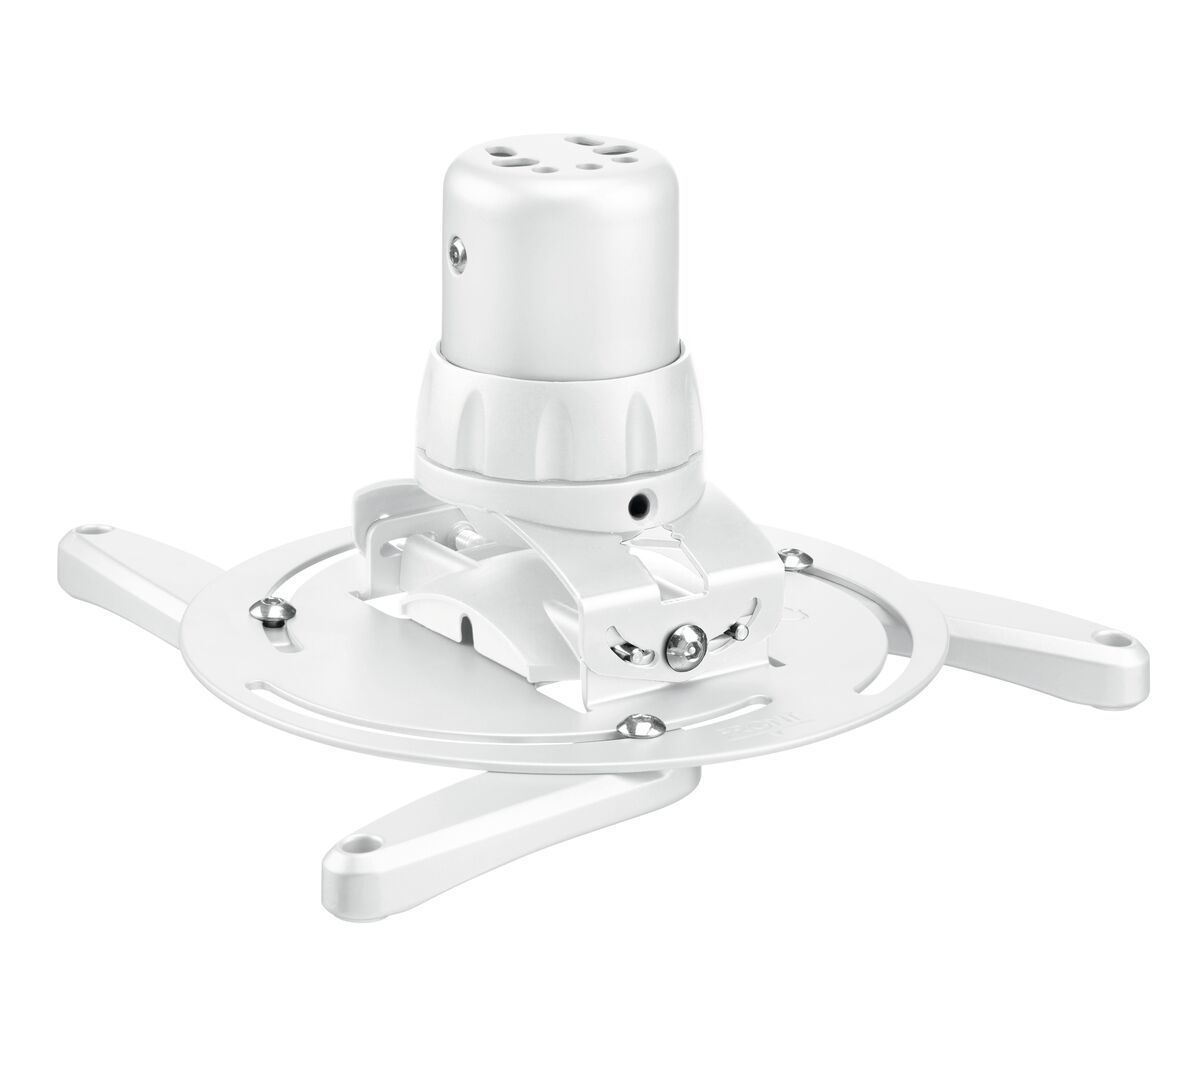 Vogel's PPC 1500 Projector Ceiling Mount White